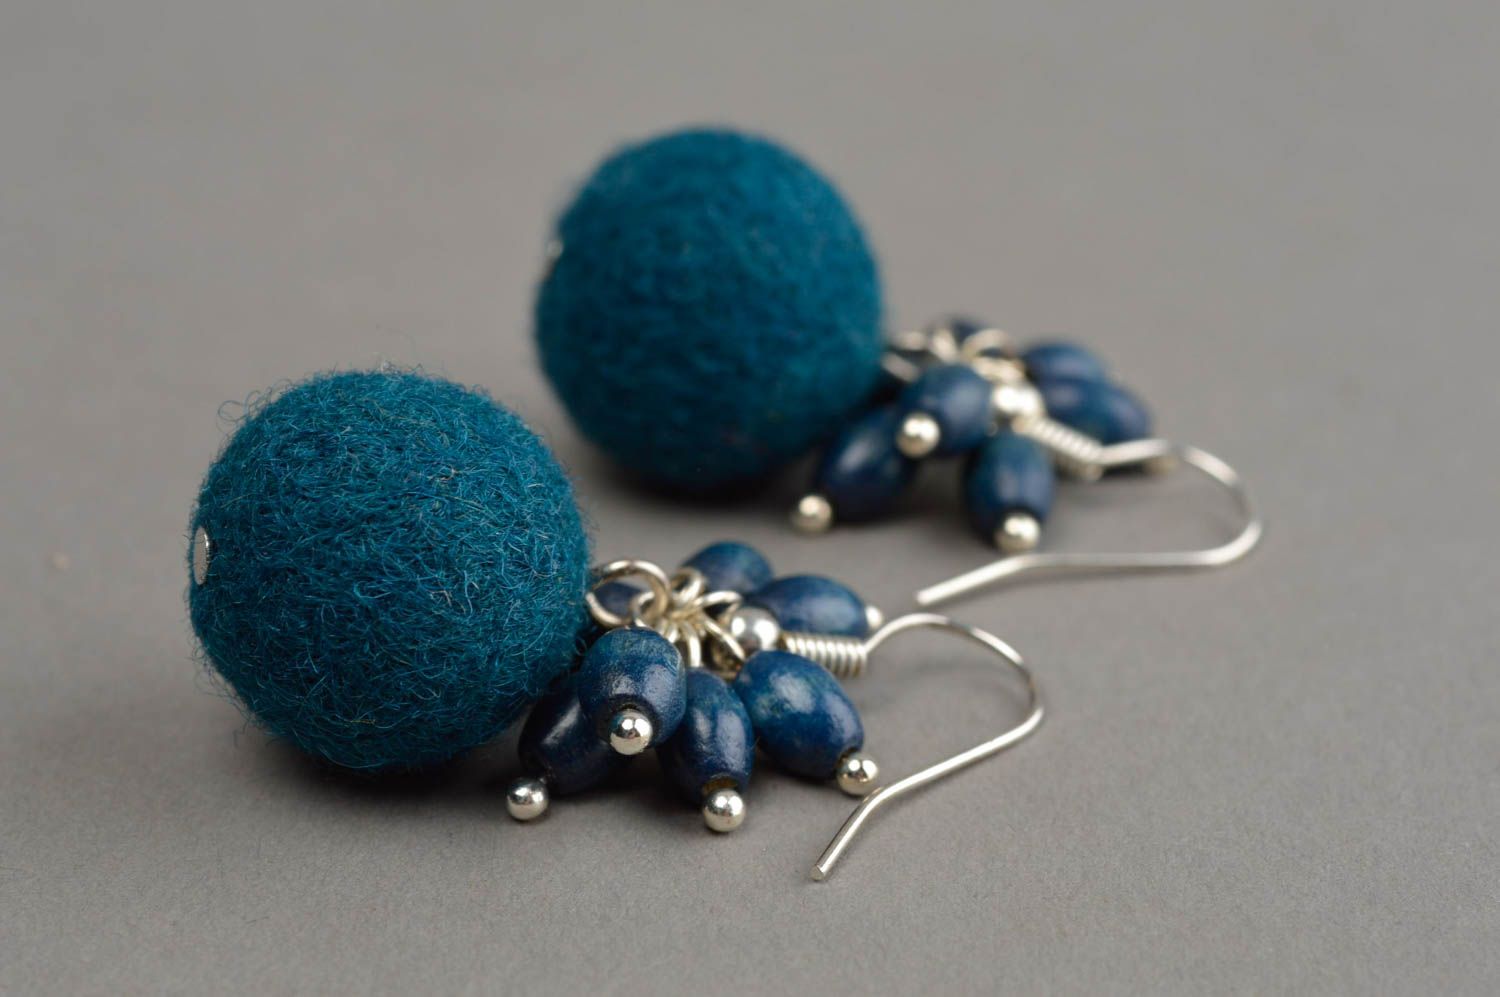 Ball earrings handcrafted jewelry designer accessories dangling earrings photo 5